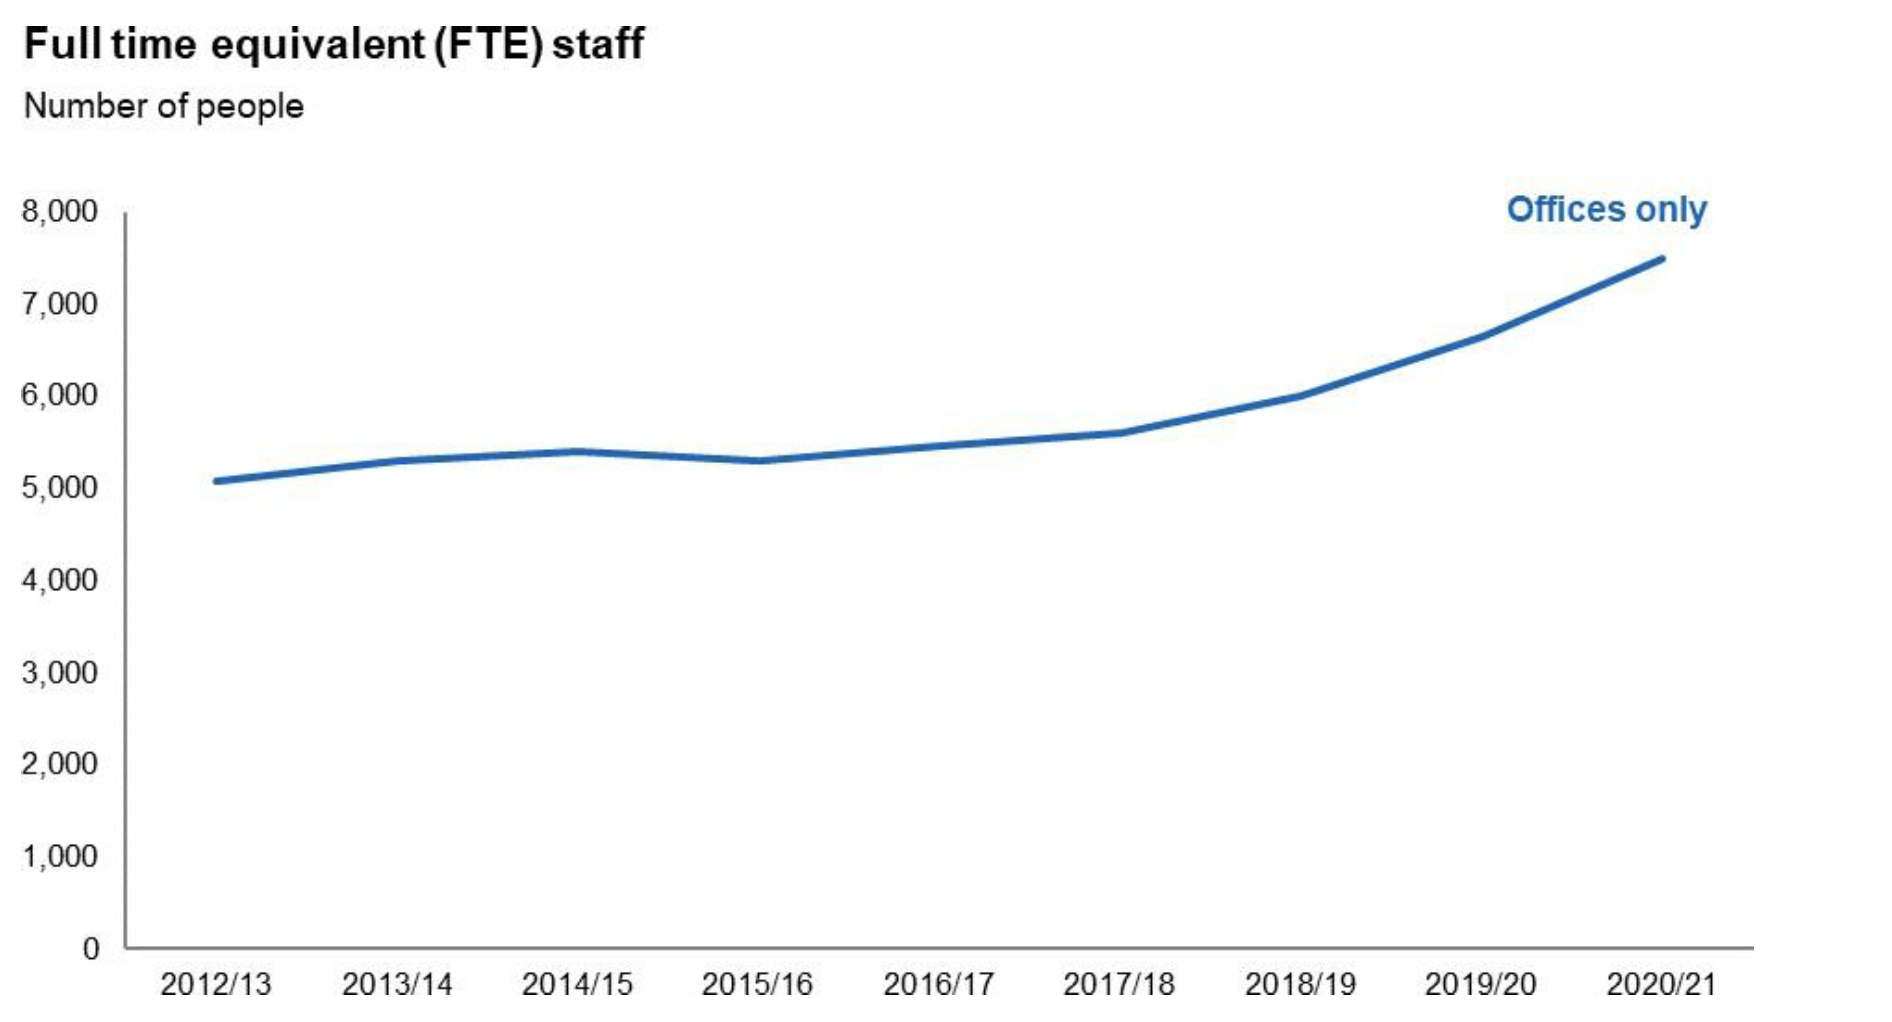 1. Full time equivalent (FTE) staff – A graph showing the annual number full time equivalent staff working in the buildings covered in this report from 2012/13 to 2020/21. The current figure is 7,495.